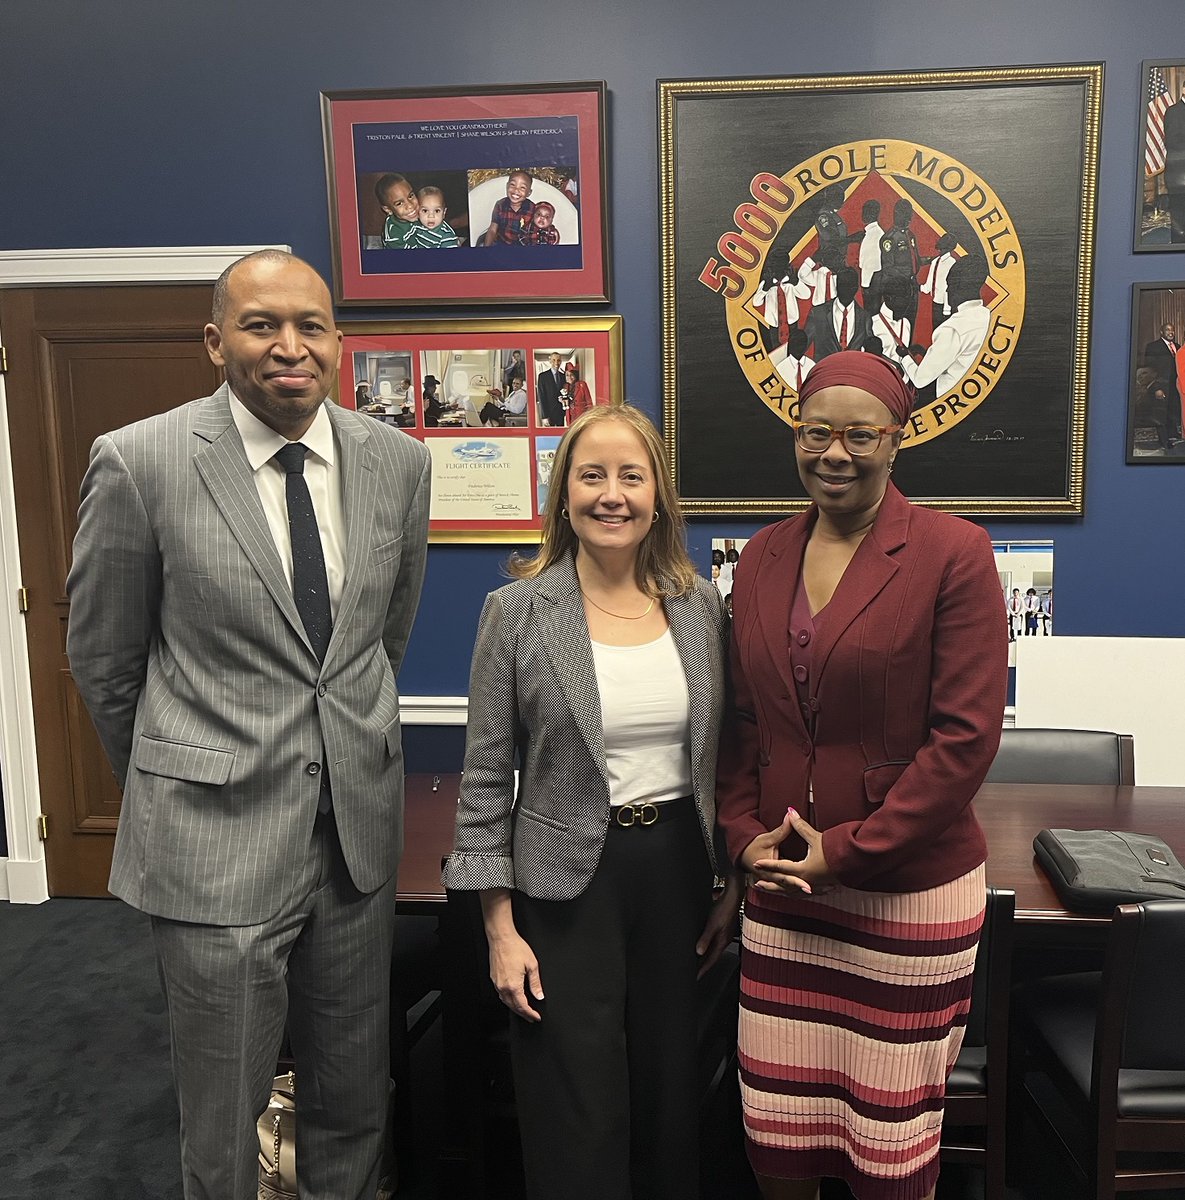 Miami-Dade TPO Executive Director, Aileen Bouclé, AICP & Deputy Director-Administration, Zainab Salim, with staff from U.S. Representative Frederica S. Wilson’s office, discussing the importance of advancing mobility options in Miami-Dade County. #MiamiDadeTPO #MiamiSMARTProgram